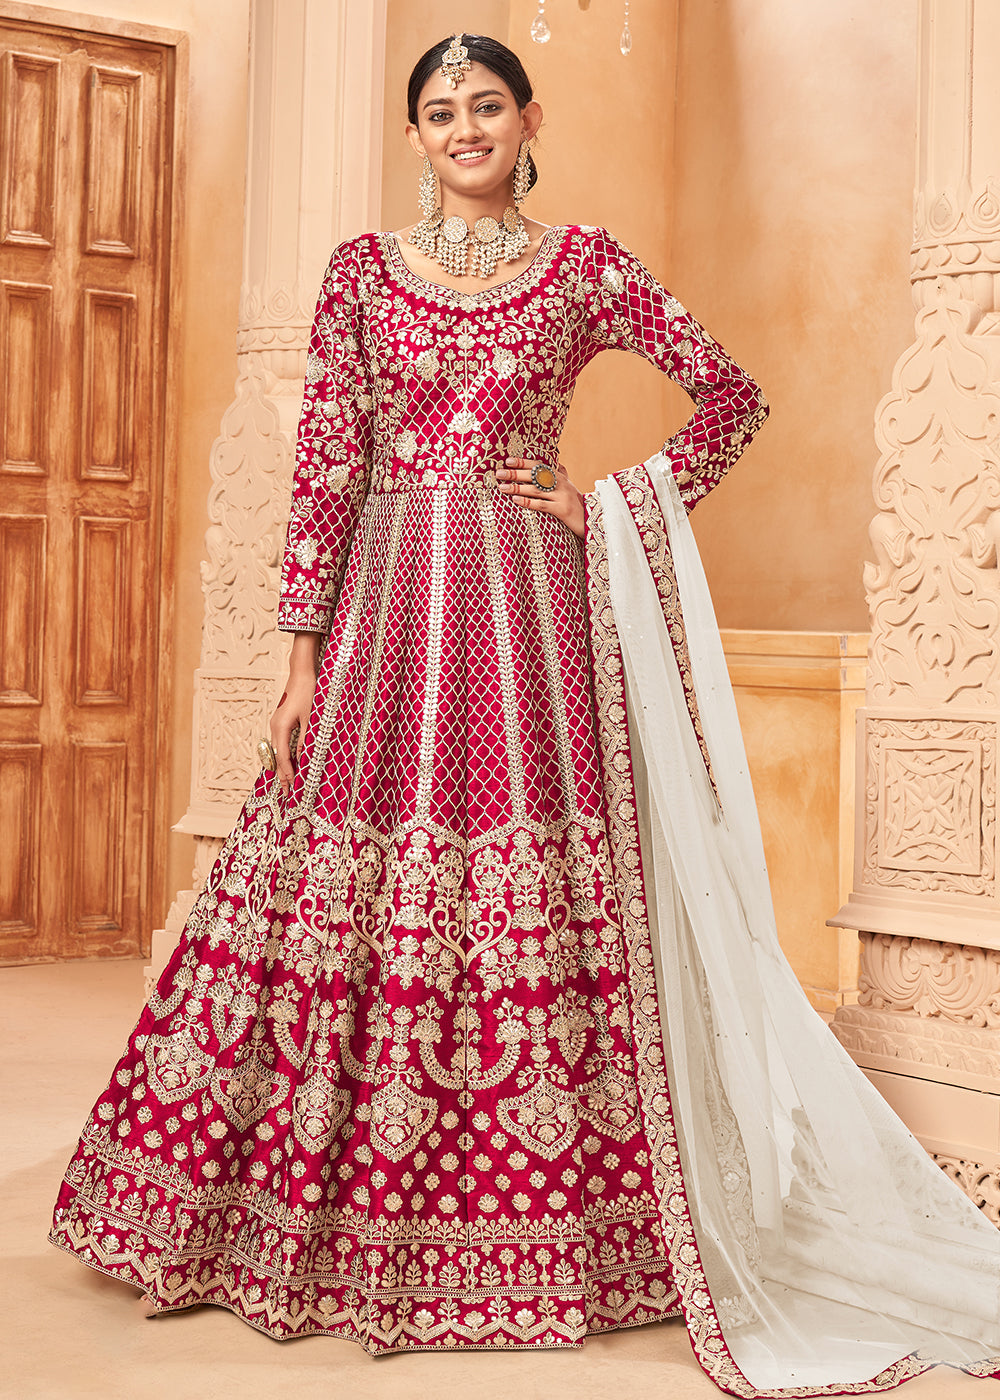 Buy Now Fascinating Hot Pink & Gold Embroidered Silk Anarkali Suit Online in USA, UK, Australia, New Zealand, Canada & Worldwide at Empress Clothing.